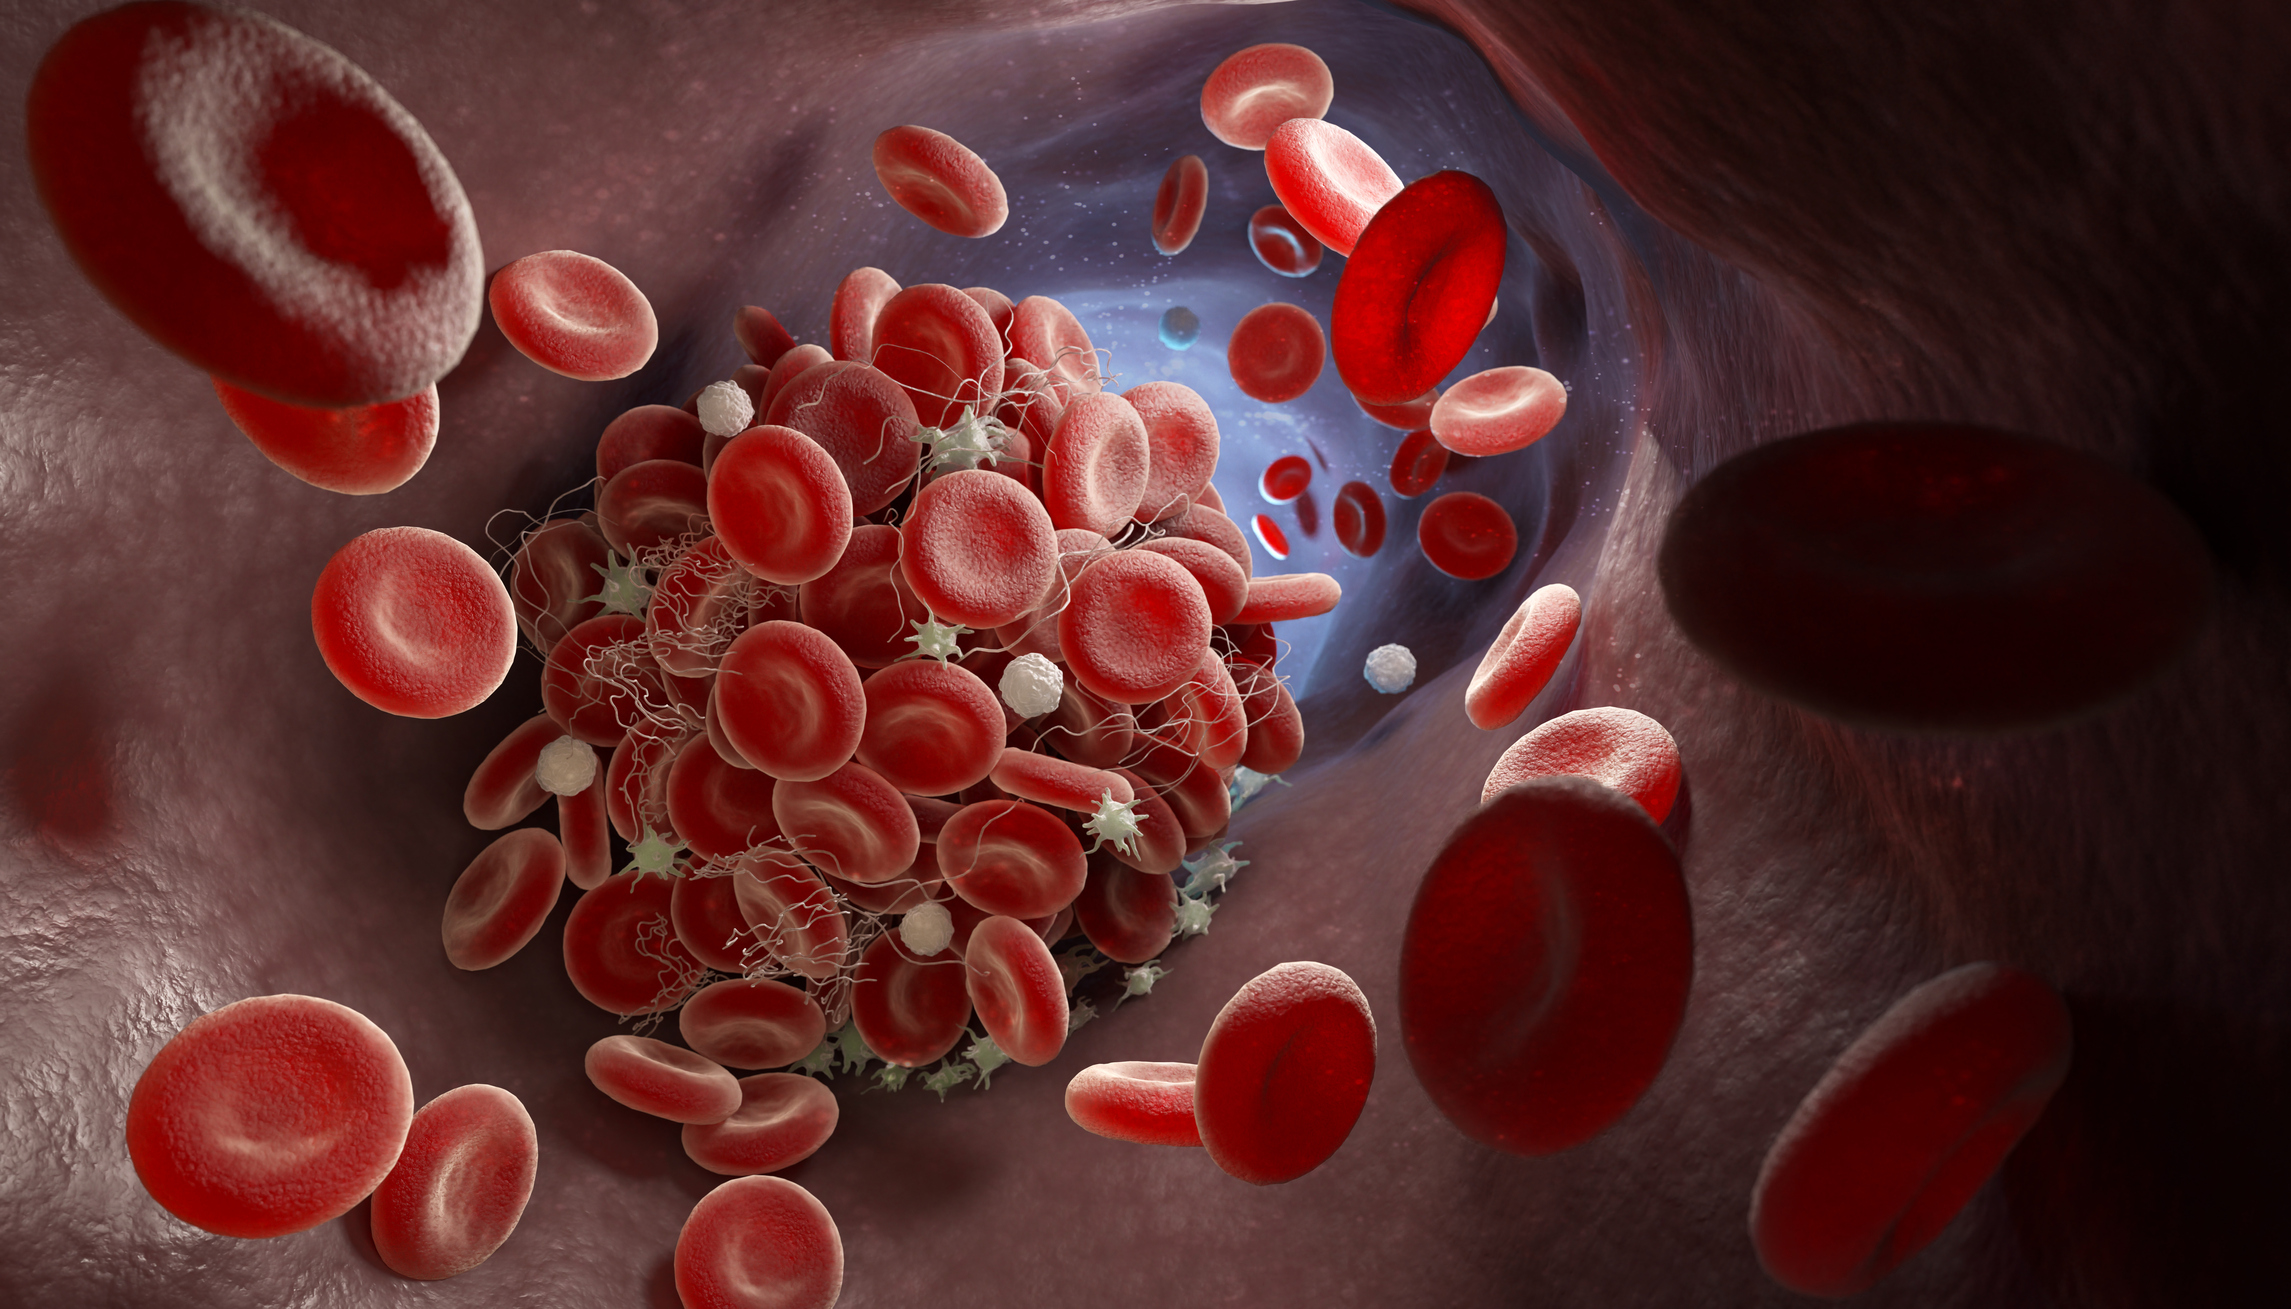 Depiction of red blood cells forming a blood clot